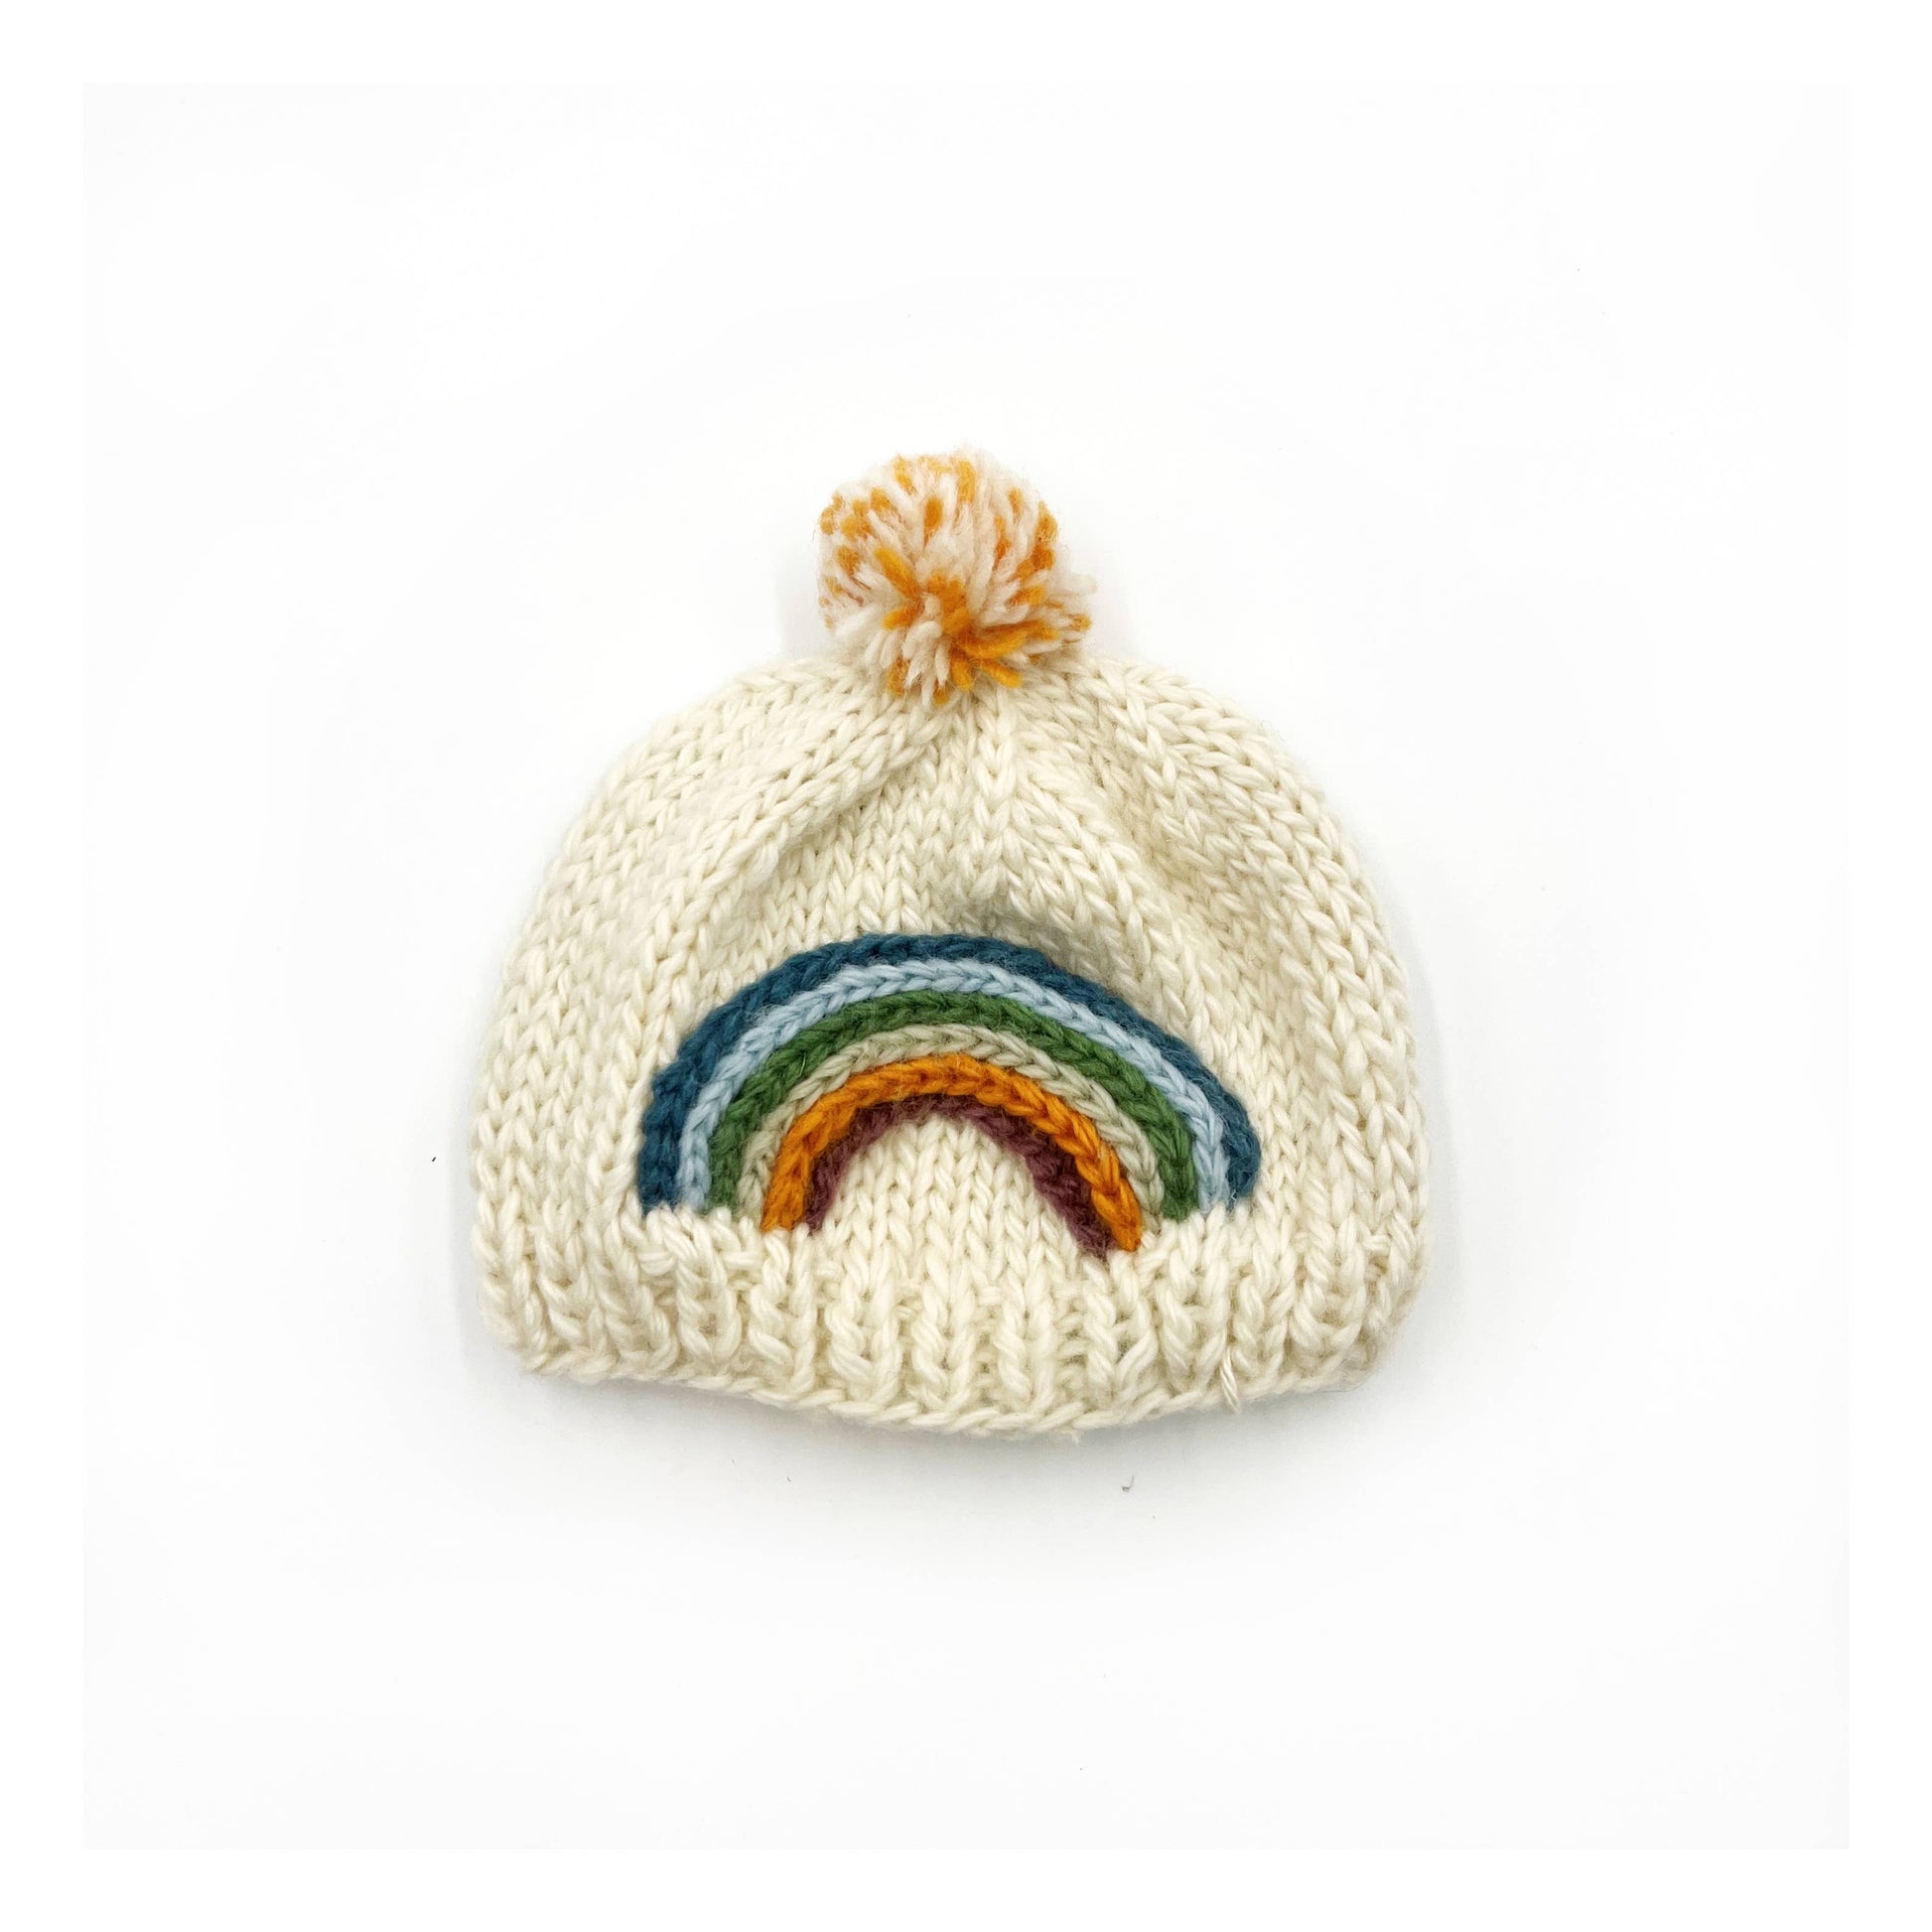 Thick, chunky woollen baby winter hat, by Pebble Child, made from 100% New Zealand merino wool in cream colour, with a knitted rainbow and a pompom on top.